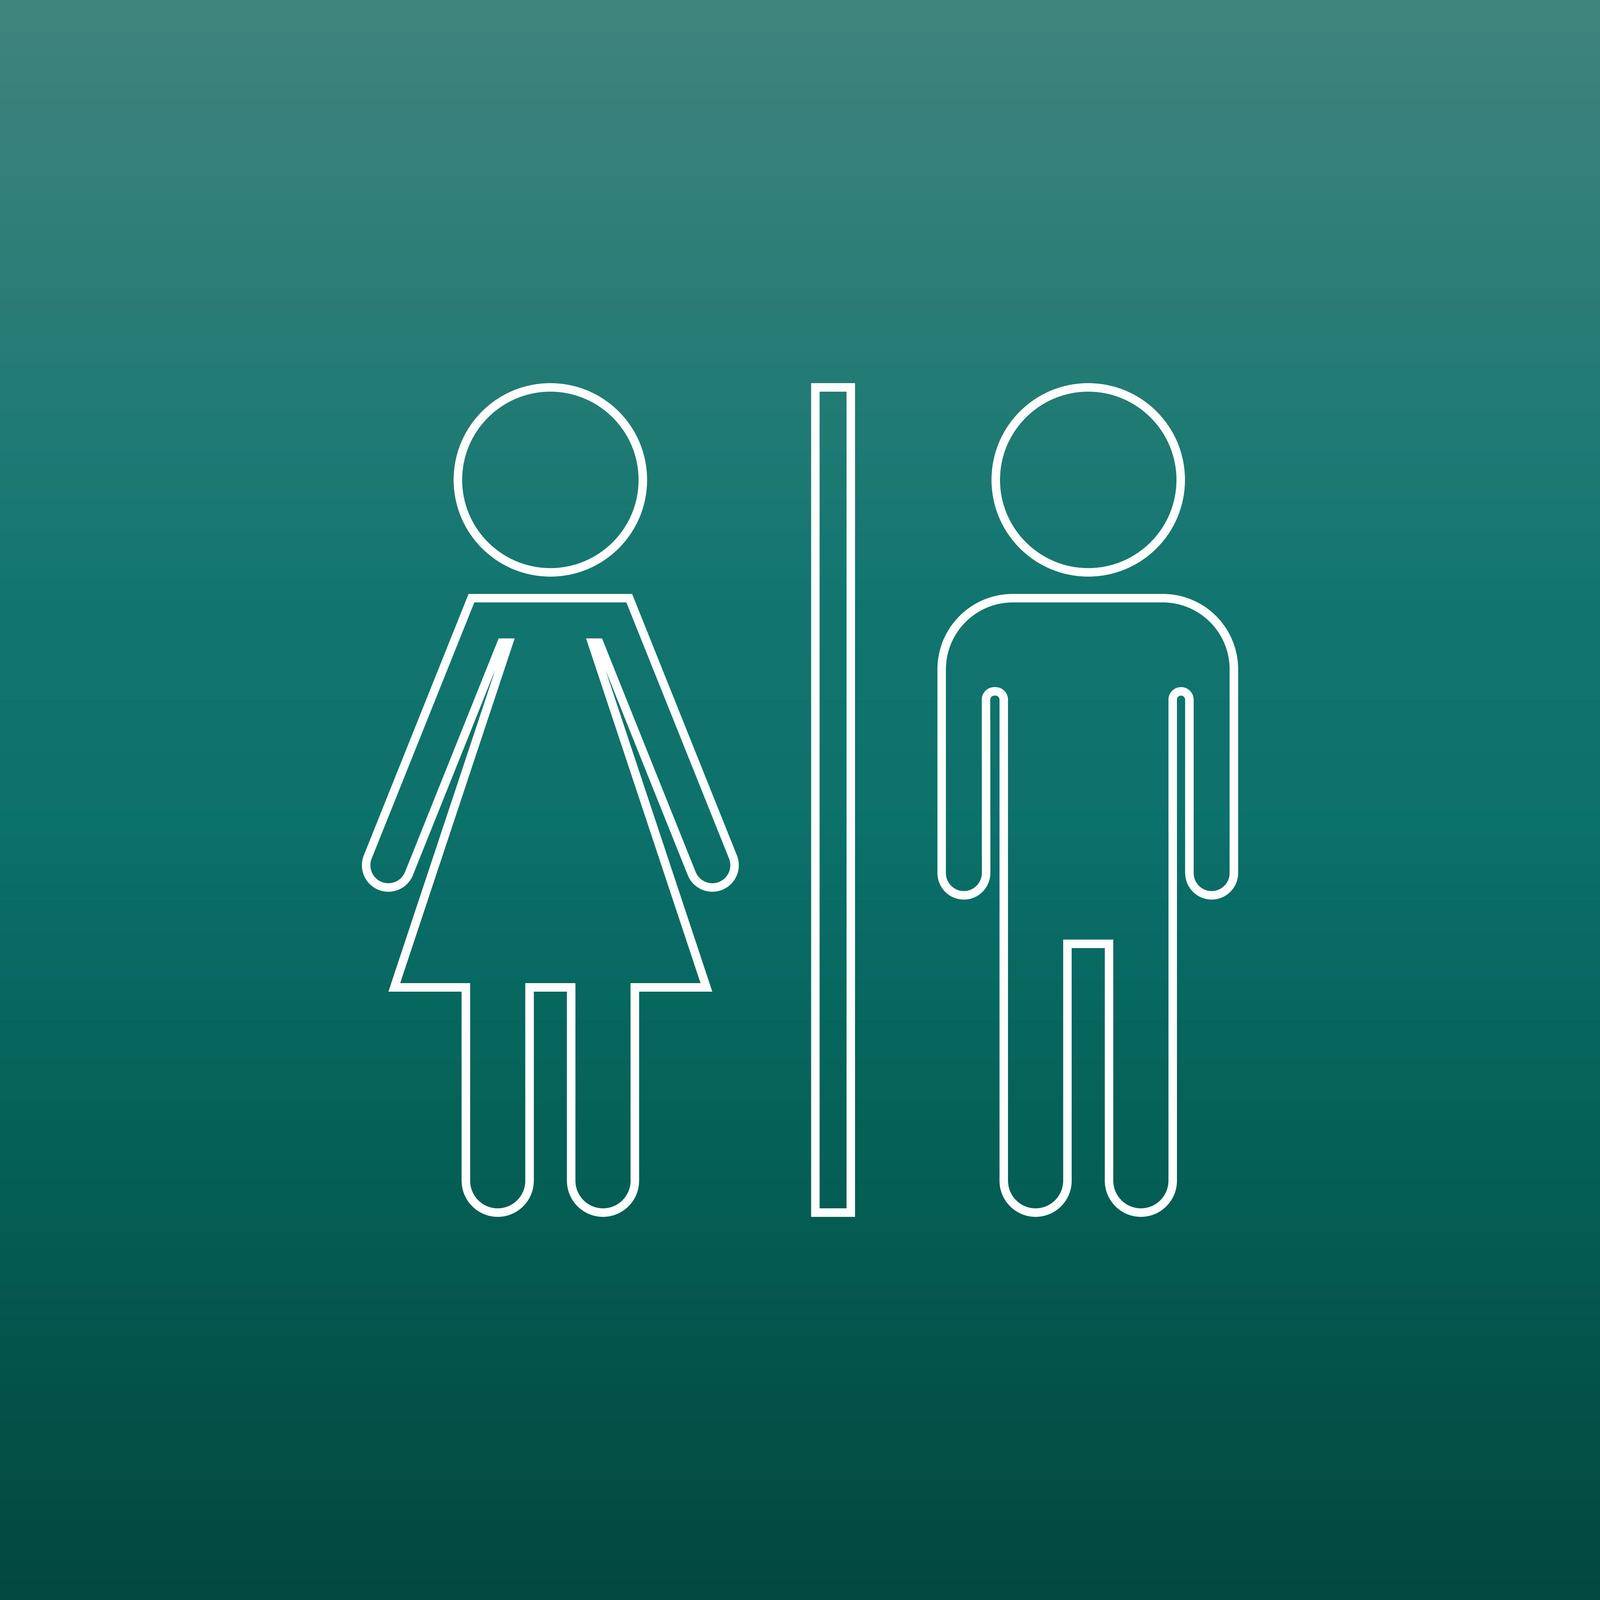 WC, toilet line vector icon . Men and women sign for restroom on green background. by LysenkoA